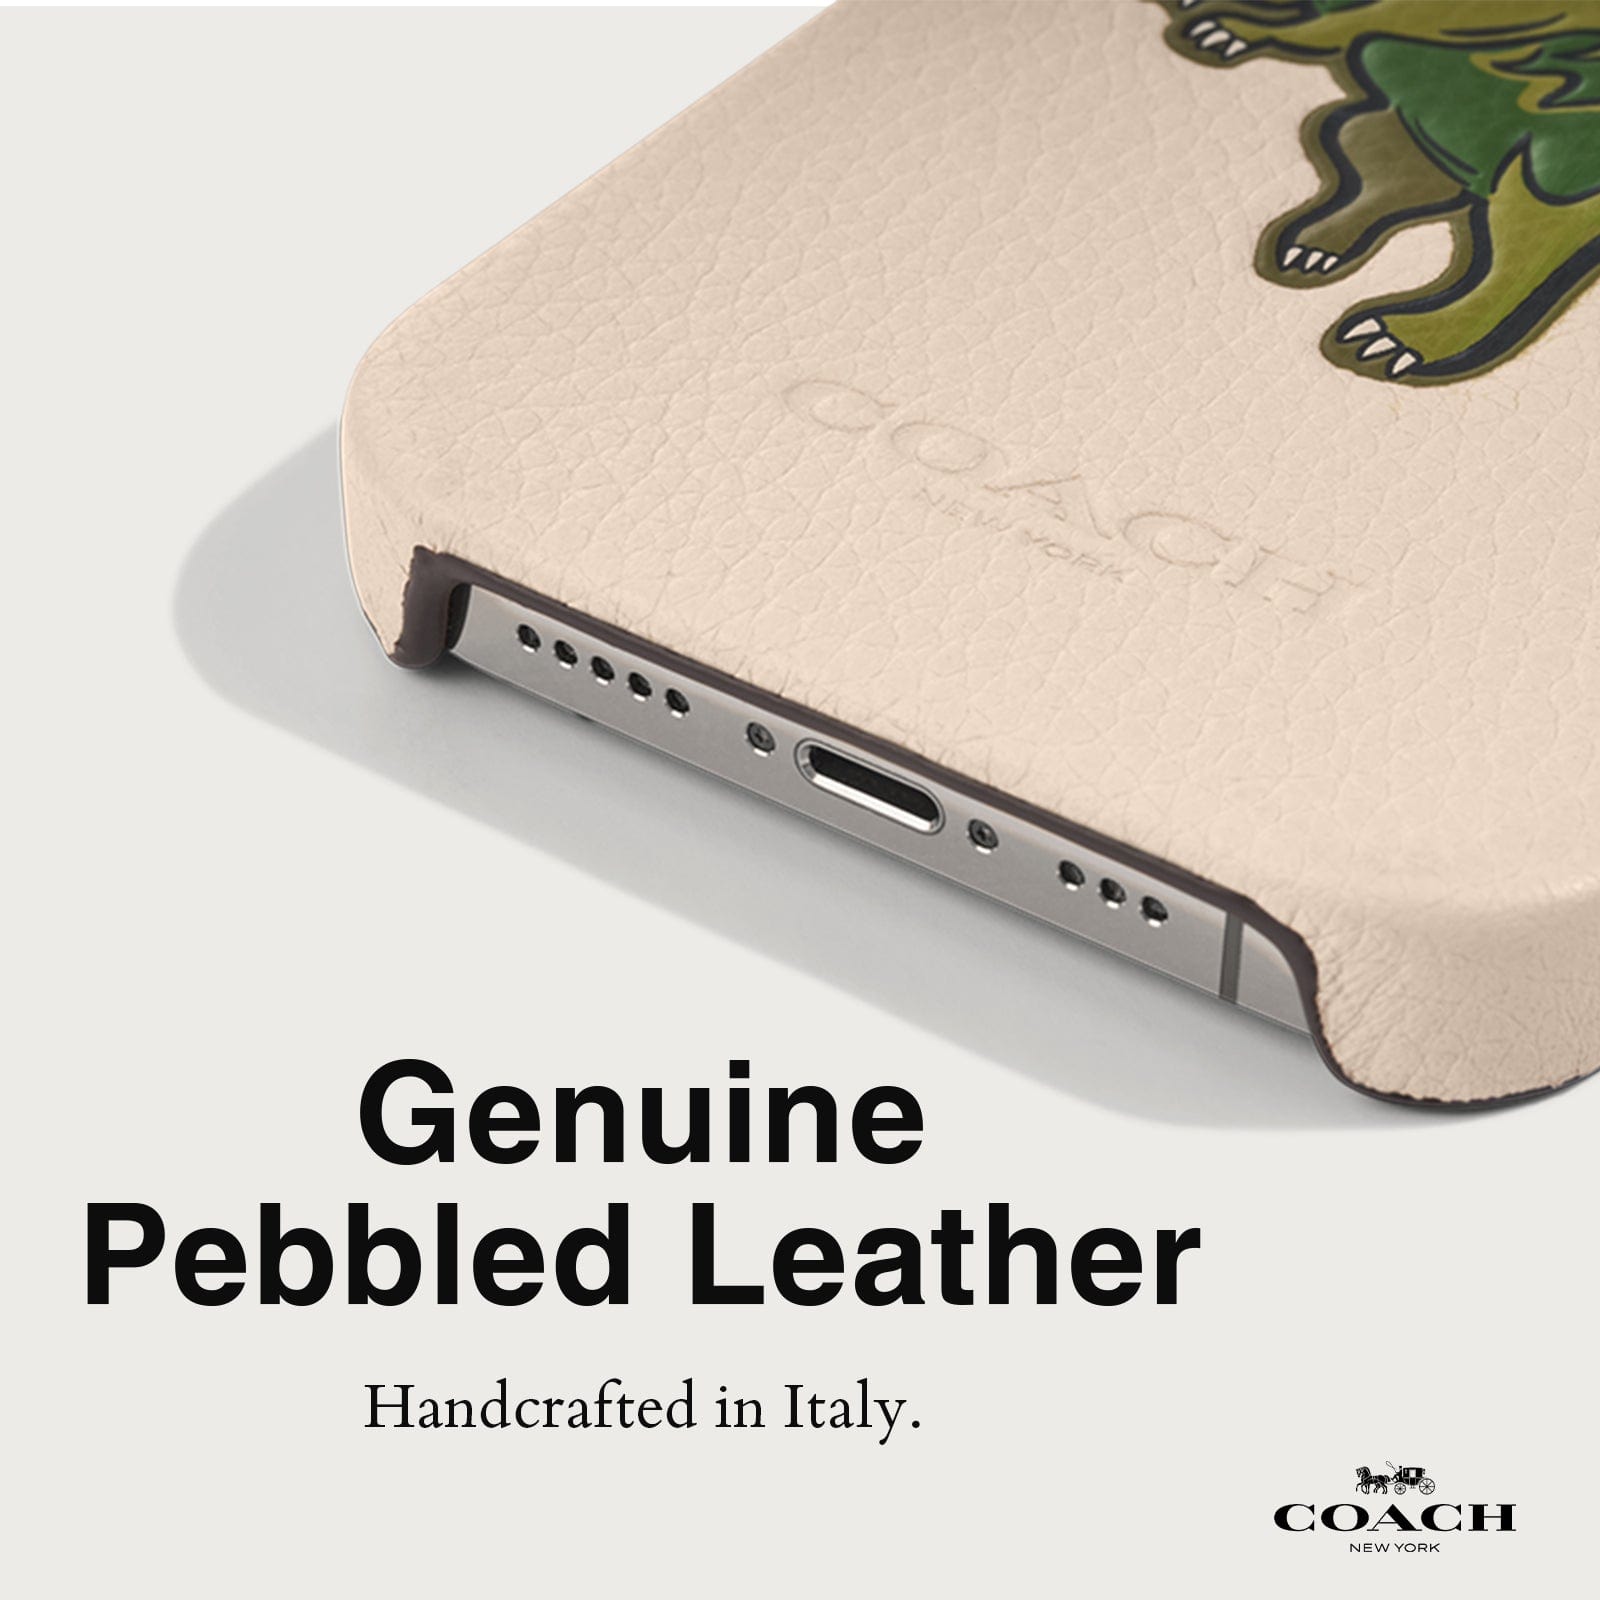 GENUINE PEBBLED LEATHER. HANDCRAFTED IN ITALY.